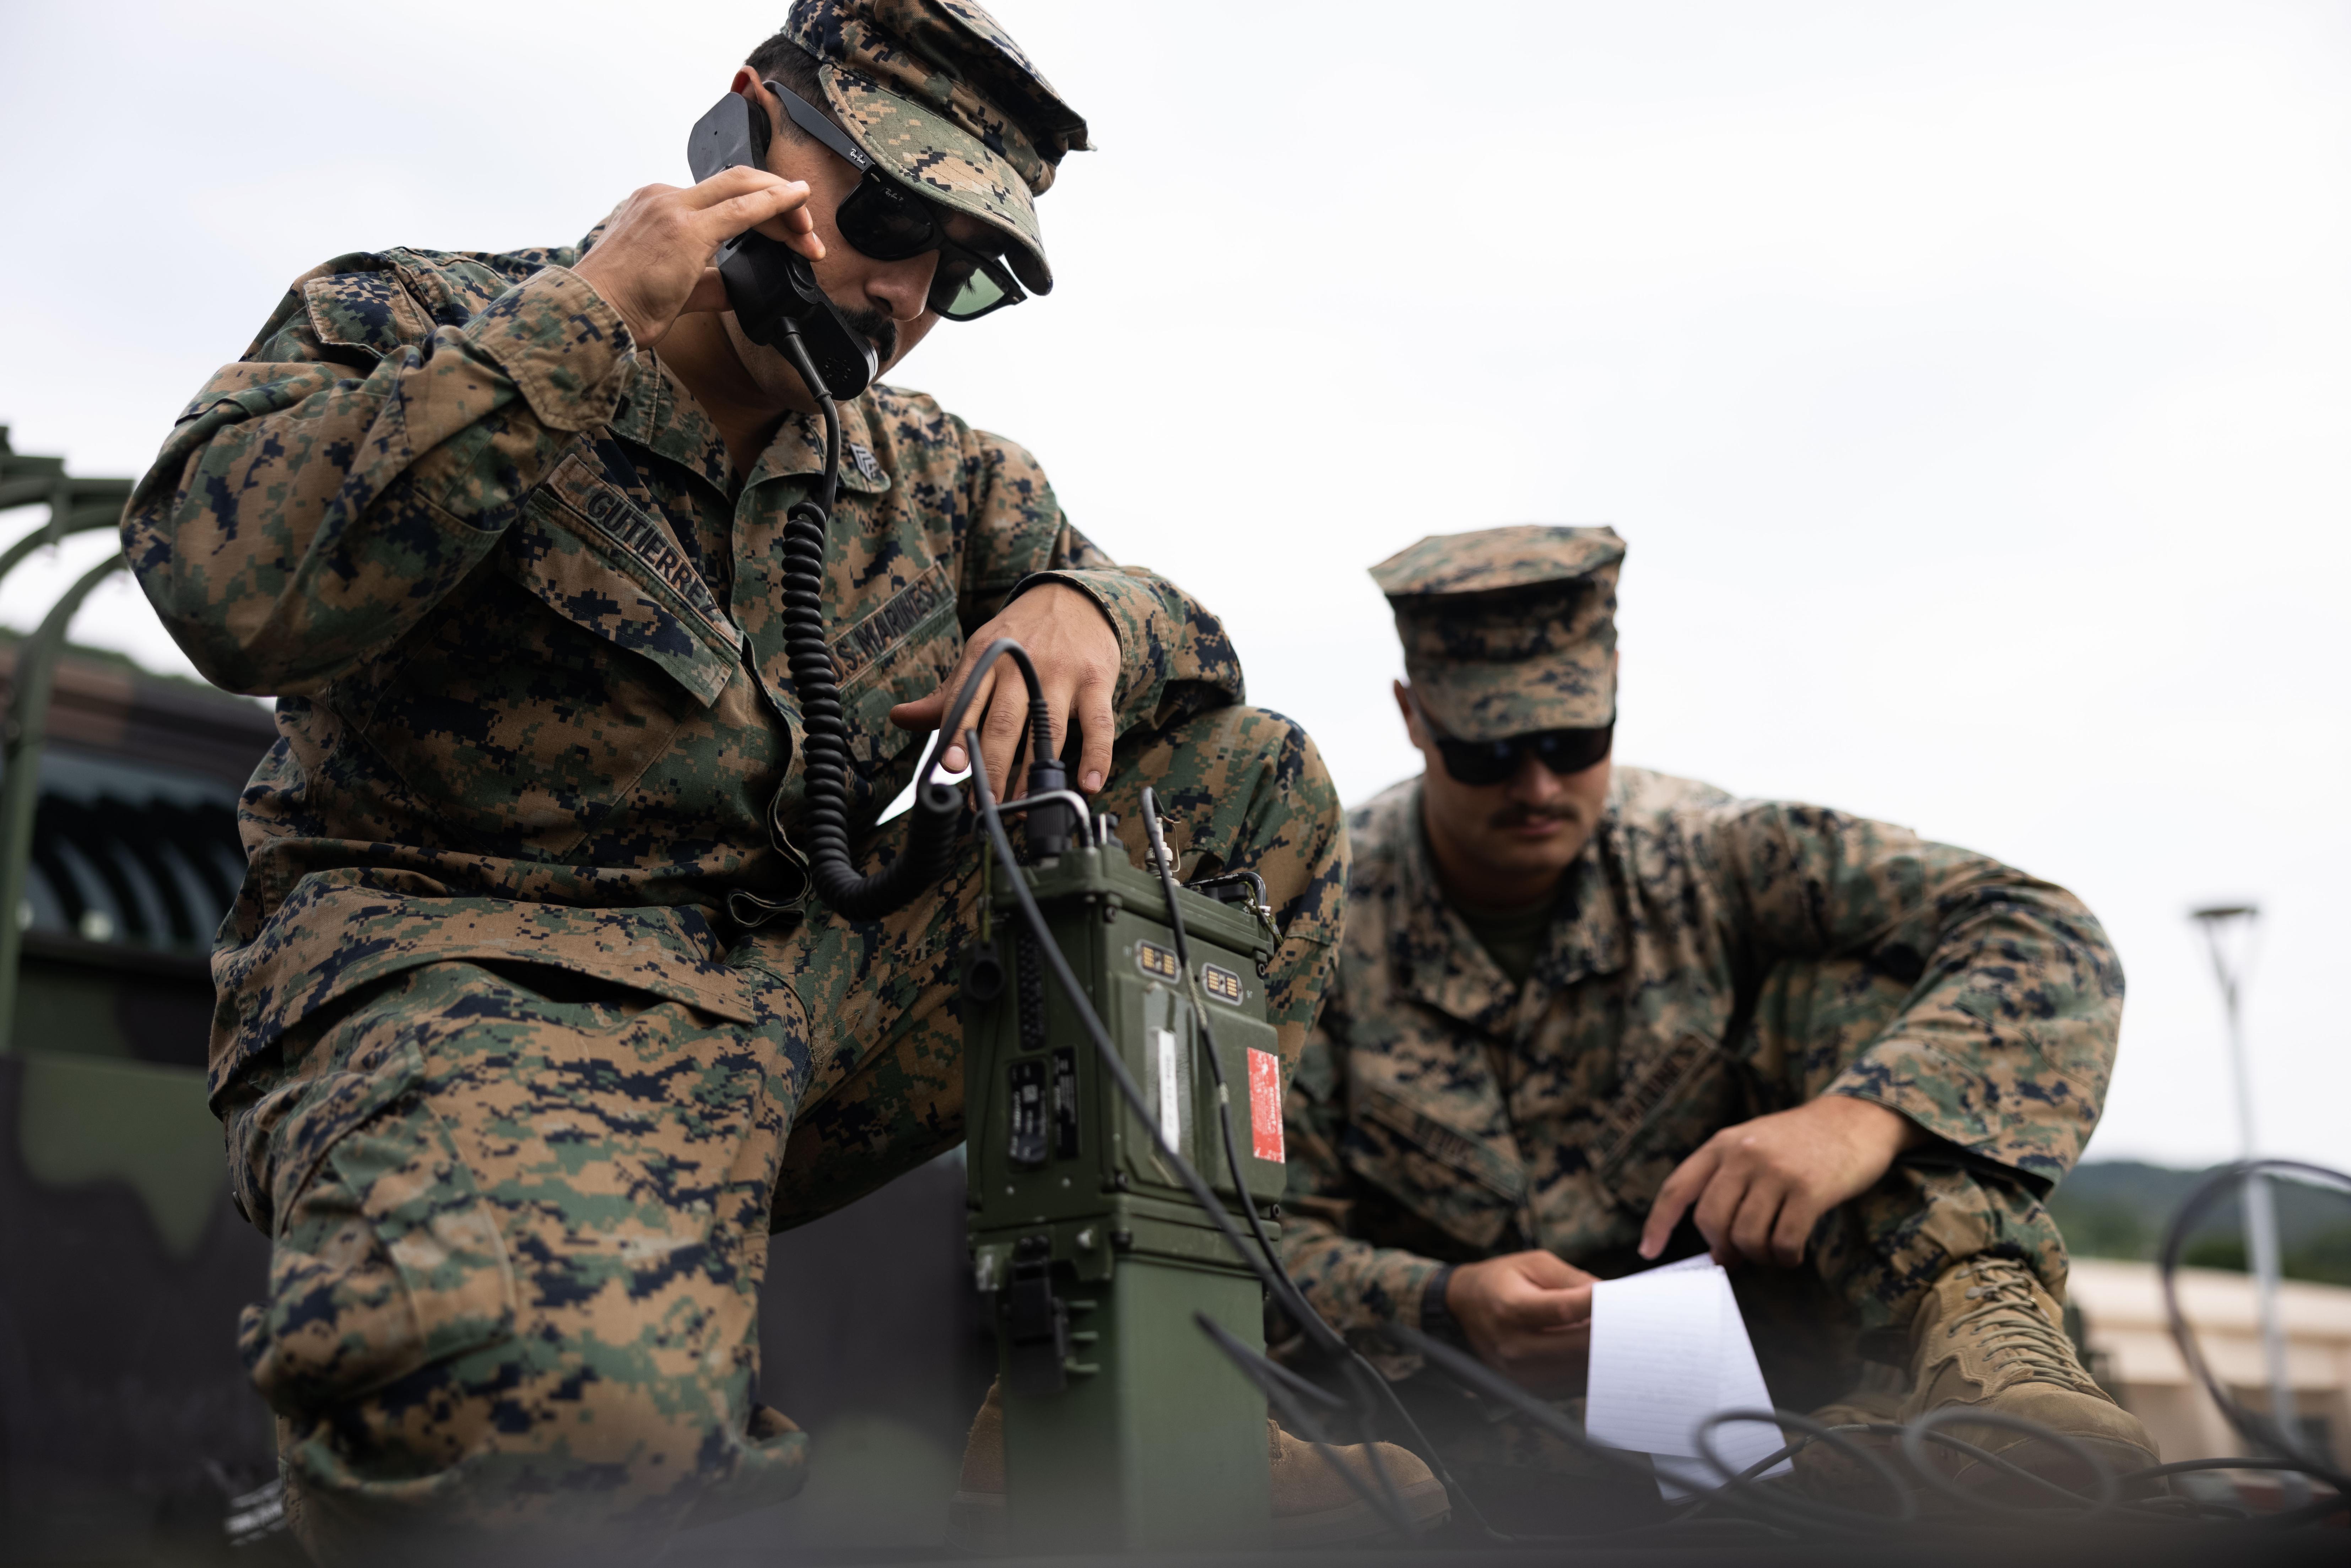 U.S. Marine Corps Sgt. Sebastian Gutierrez, (left), a network administrator, and Cpl. Elijah Leduc, (right), a tactical air defense controller, with Marine Air Control Squadron 4, 1st Marine Aircraft Wing, conduct radio checks on an AN/PRC-117G radio during the field training exercise portion of Resolute Dragon 23 at Japan Ground Self-Defense Force Camp Ishigaki, Okinawa, Japan, Oct. 15, 2023.